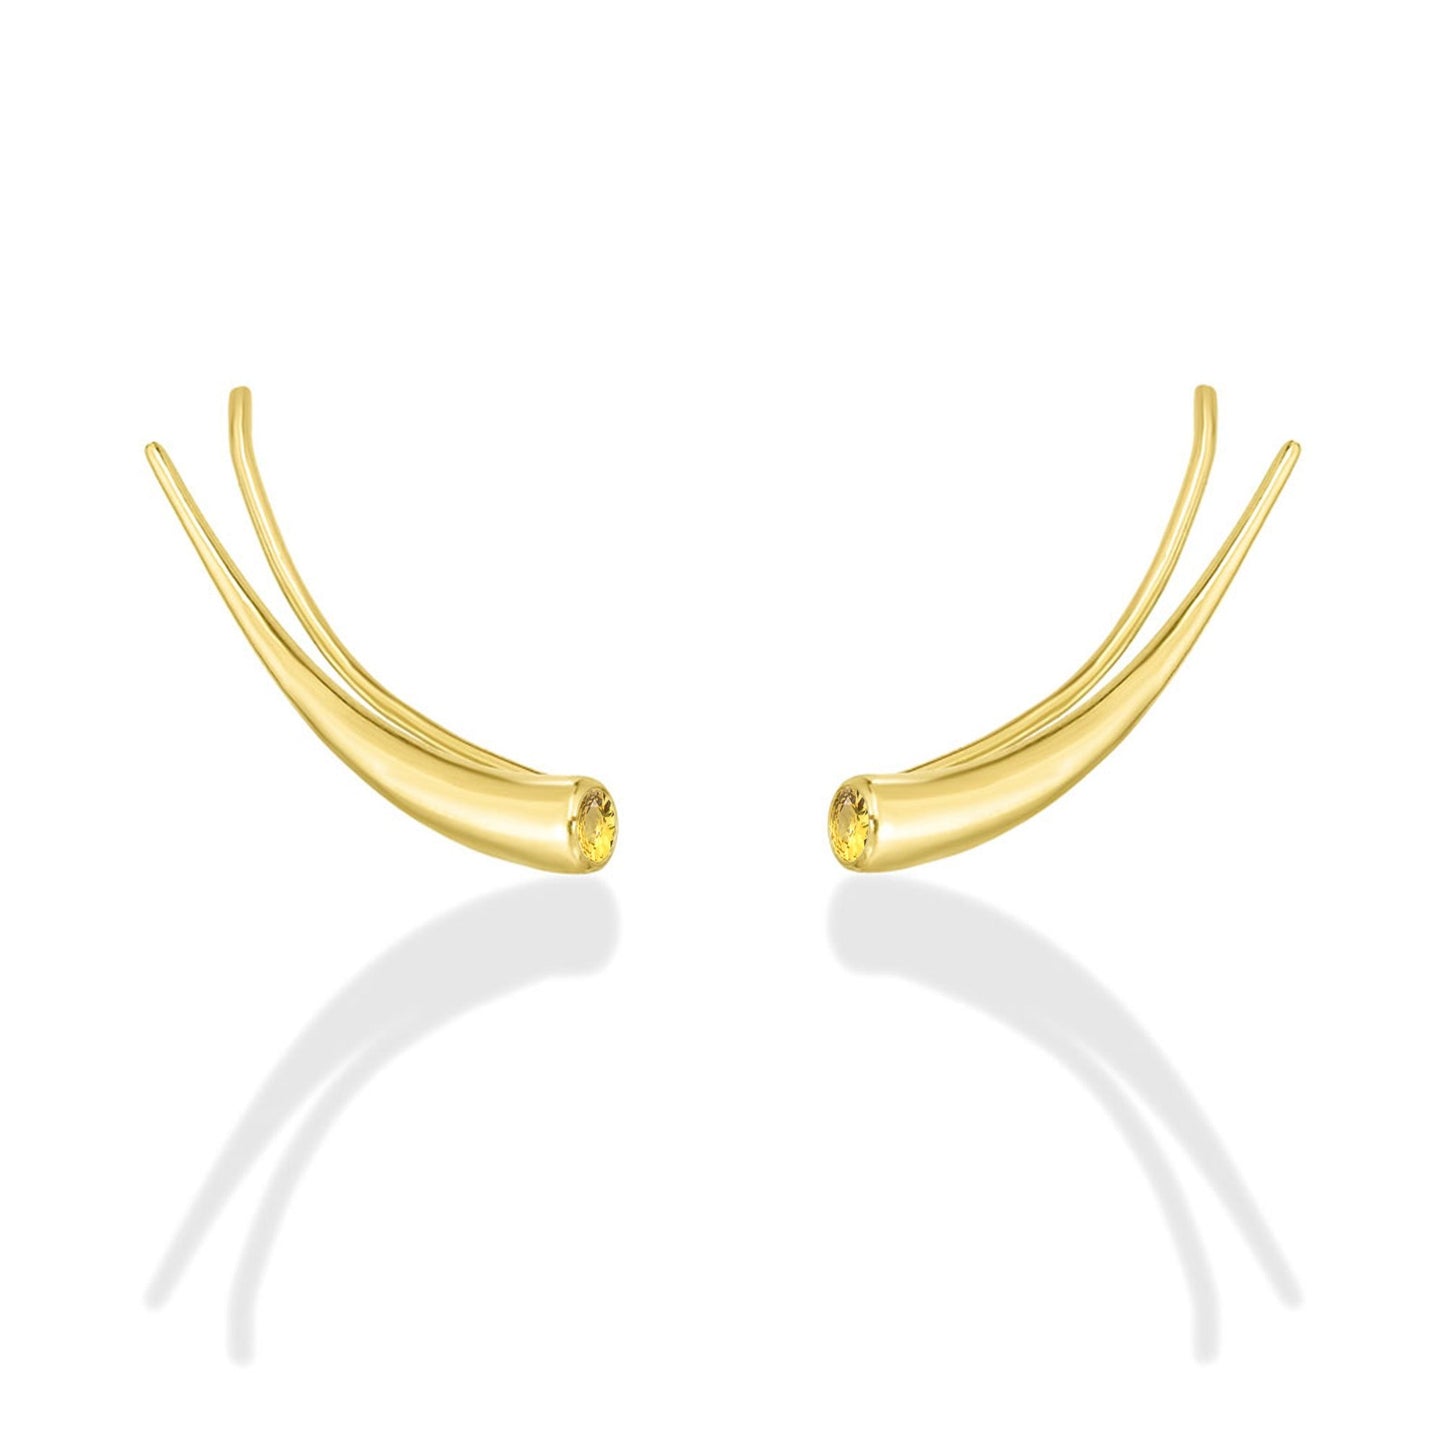 14k gold Curved Quill Climber Earrings with yellow topaz